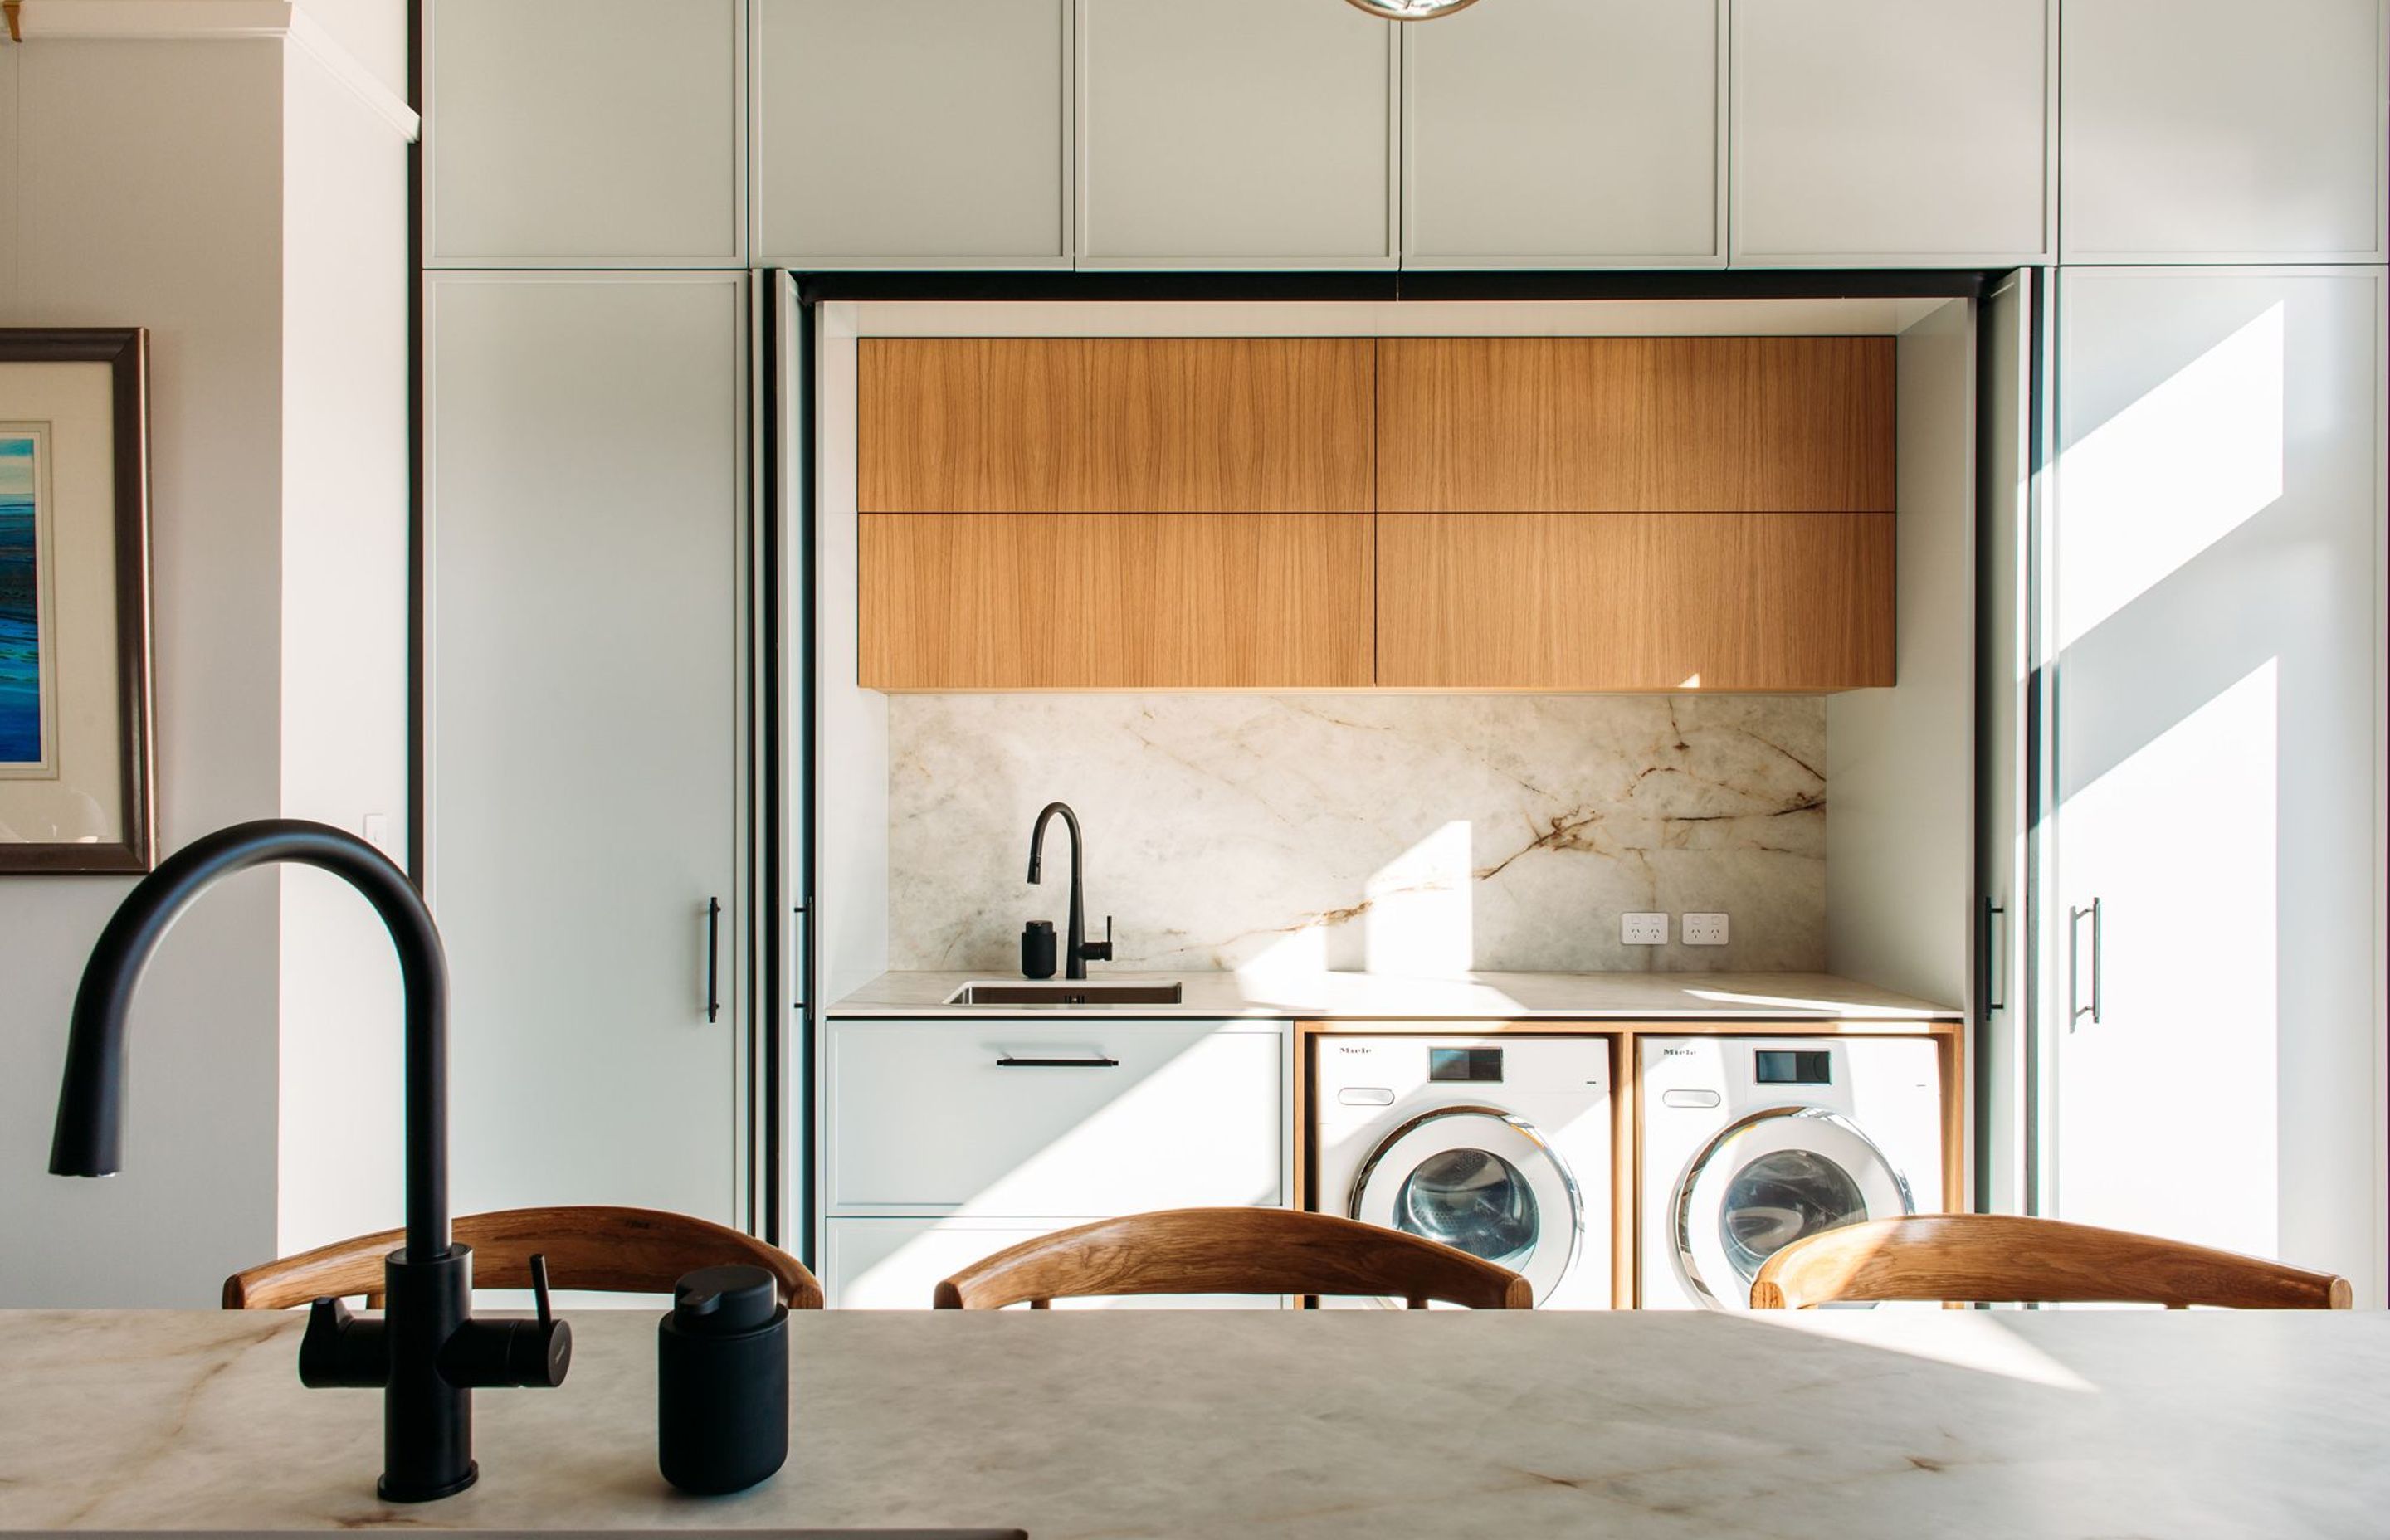 The laundry is well designed into this interior.